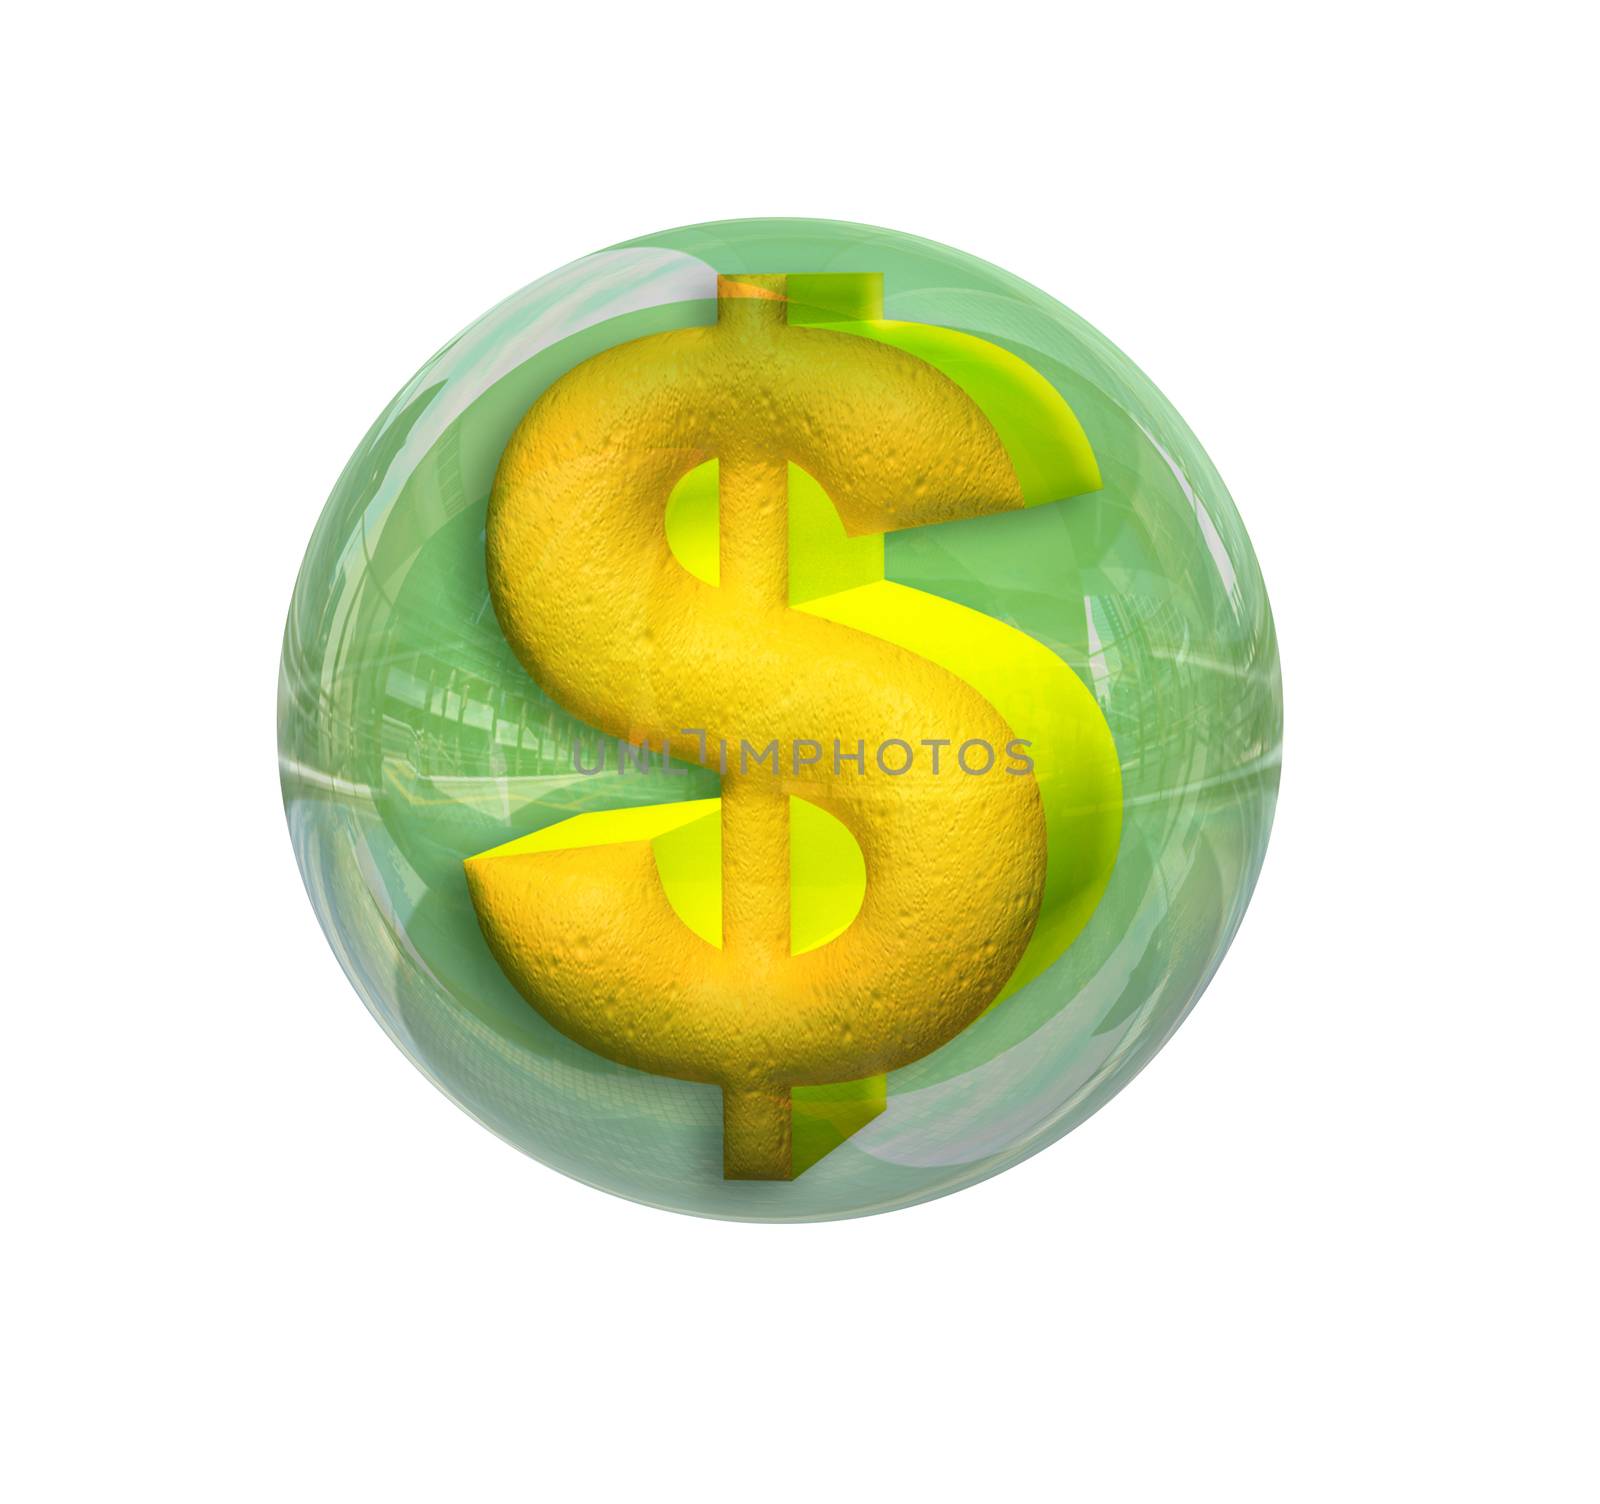 Dollar in a sphere by 26amandine